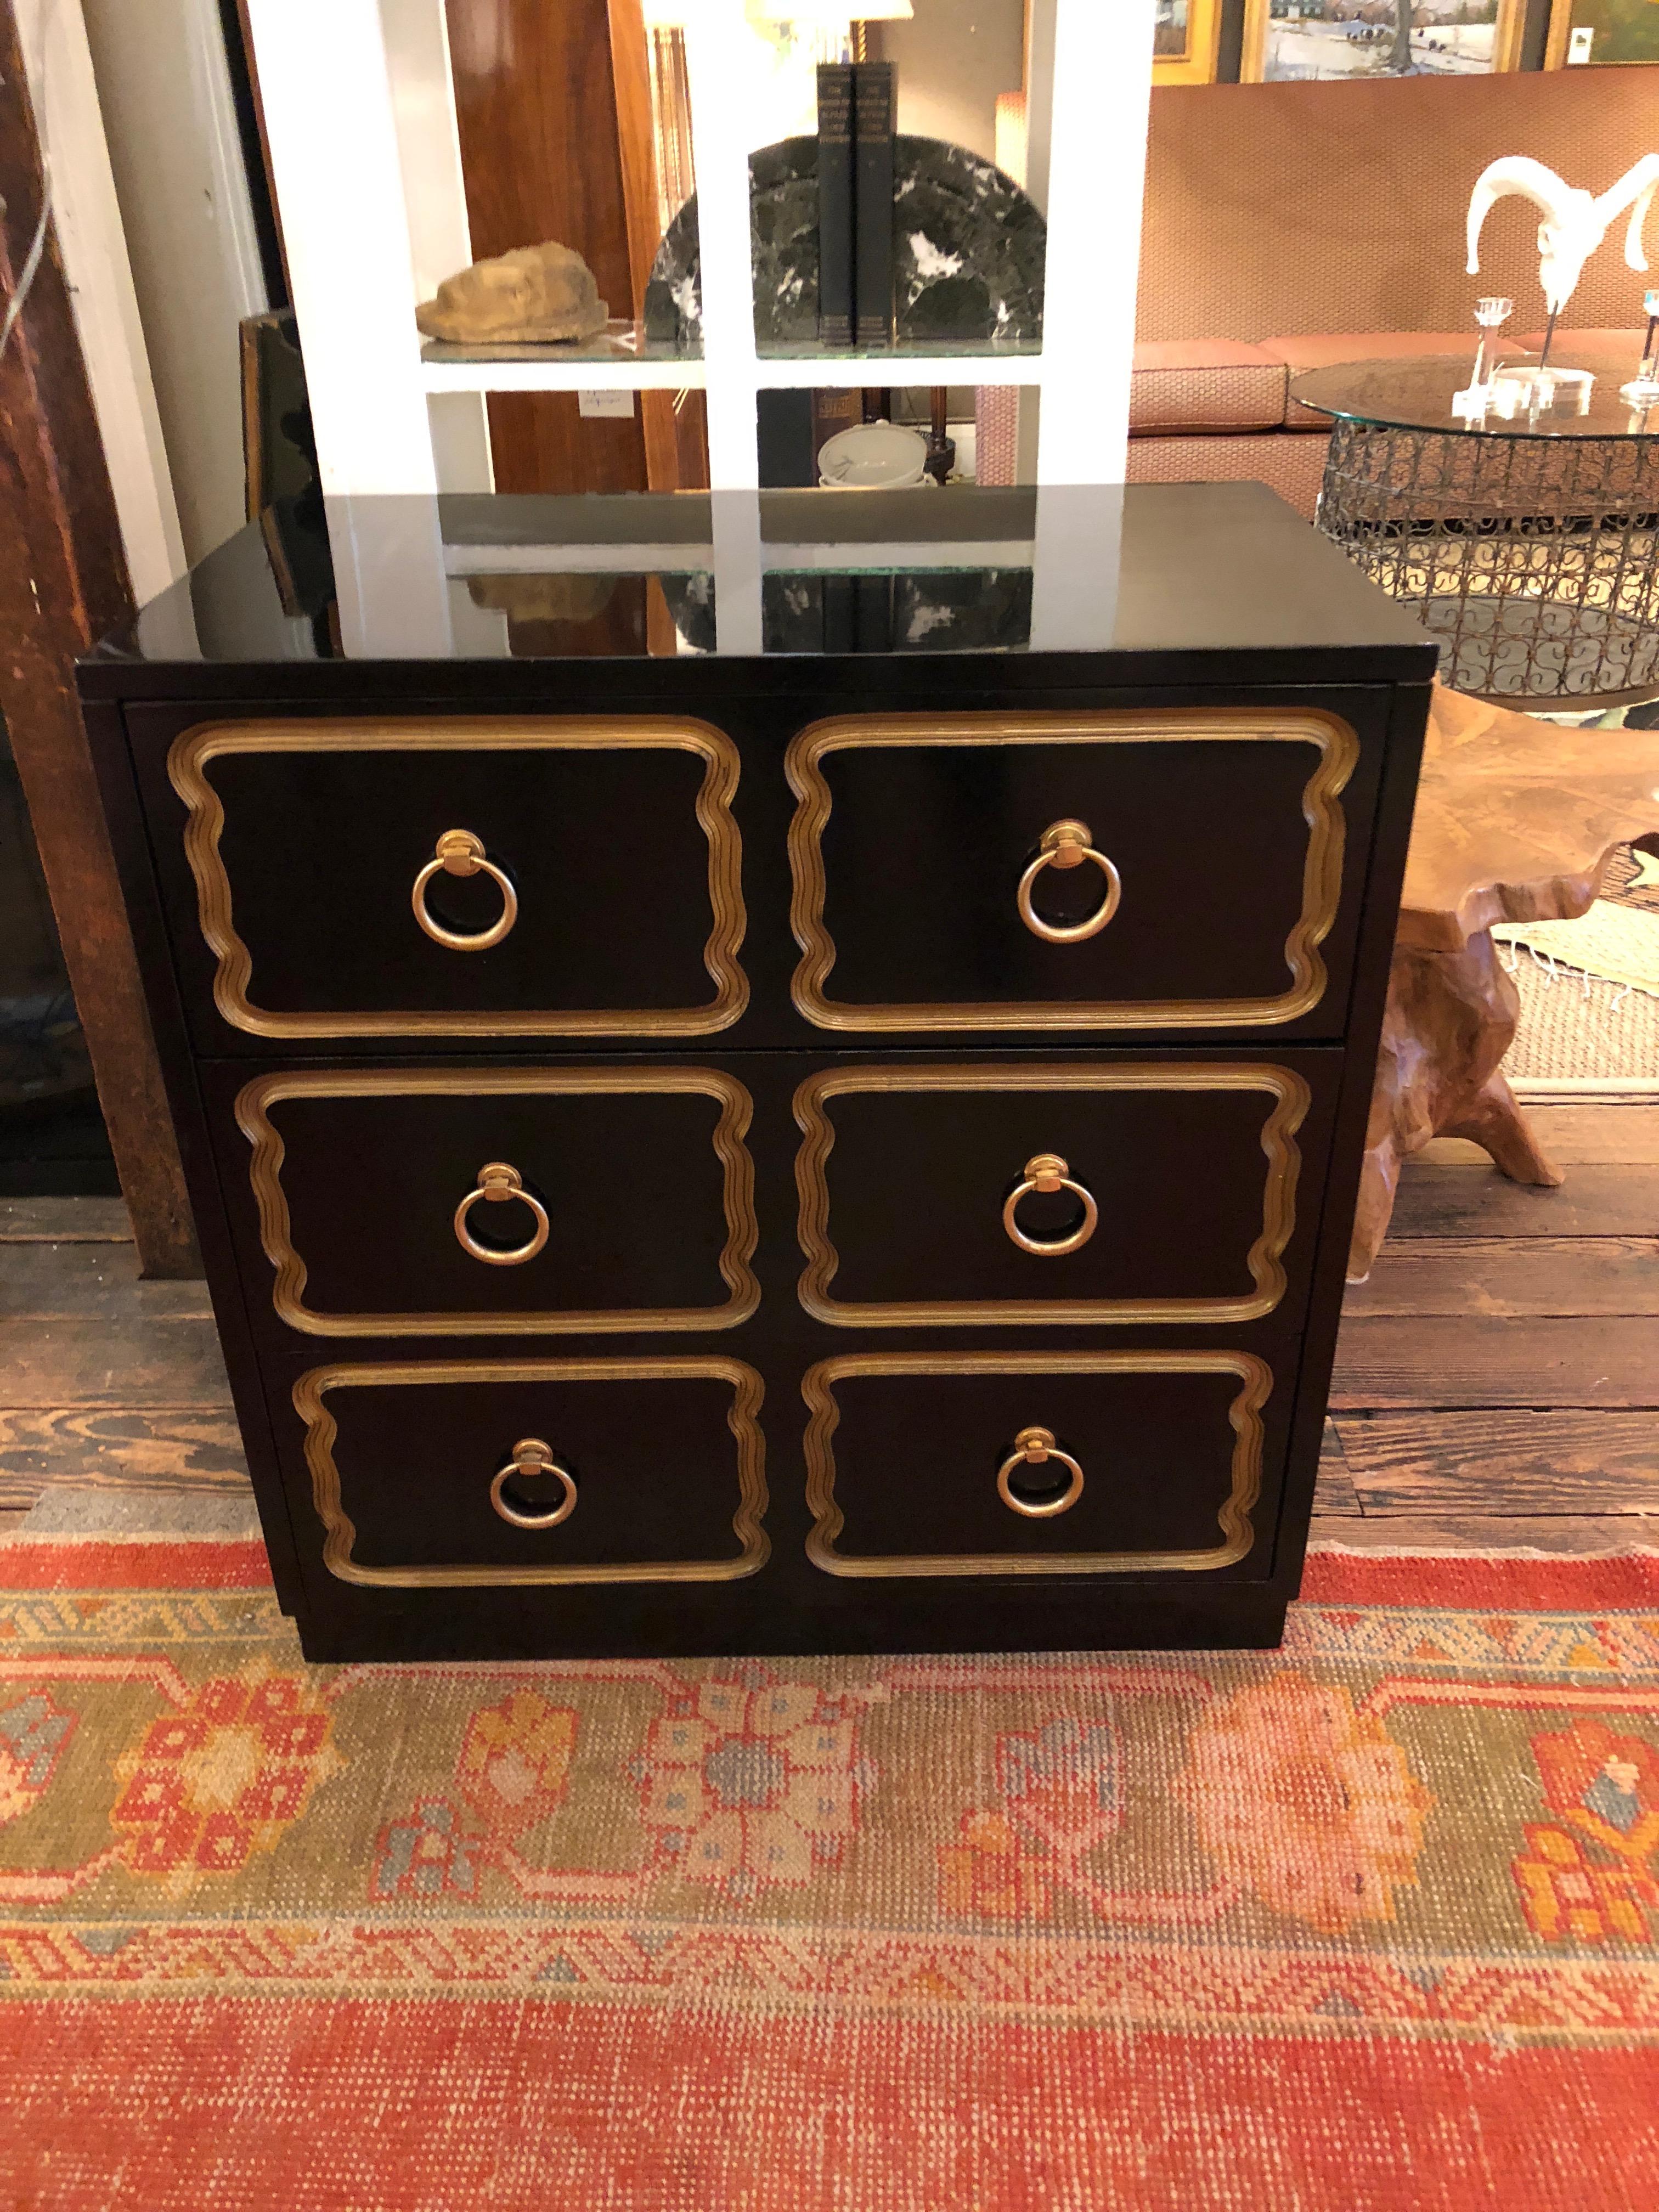 Glamorous black and gold commode with the signature look of a Dorothy Draper design having gold carved squiggly outlines and handsome circular ring hardware on three generously sized drawers.